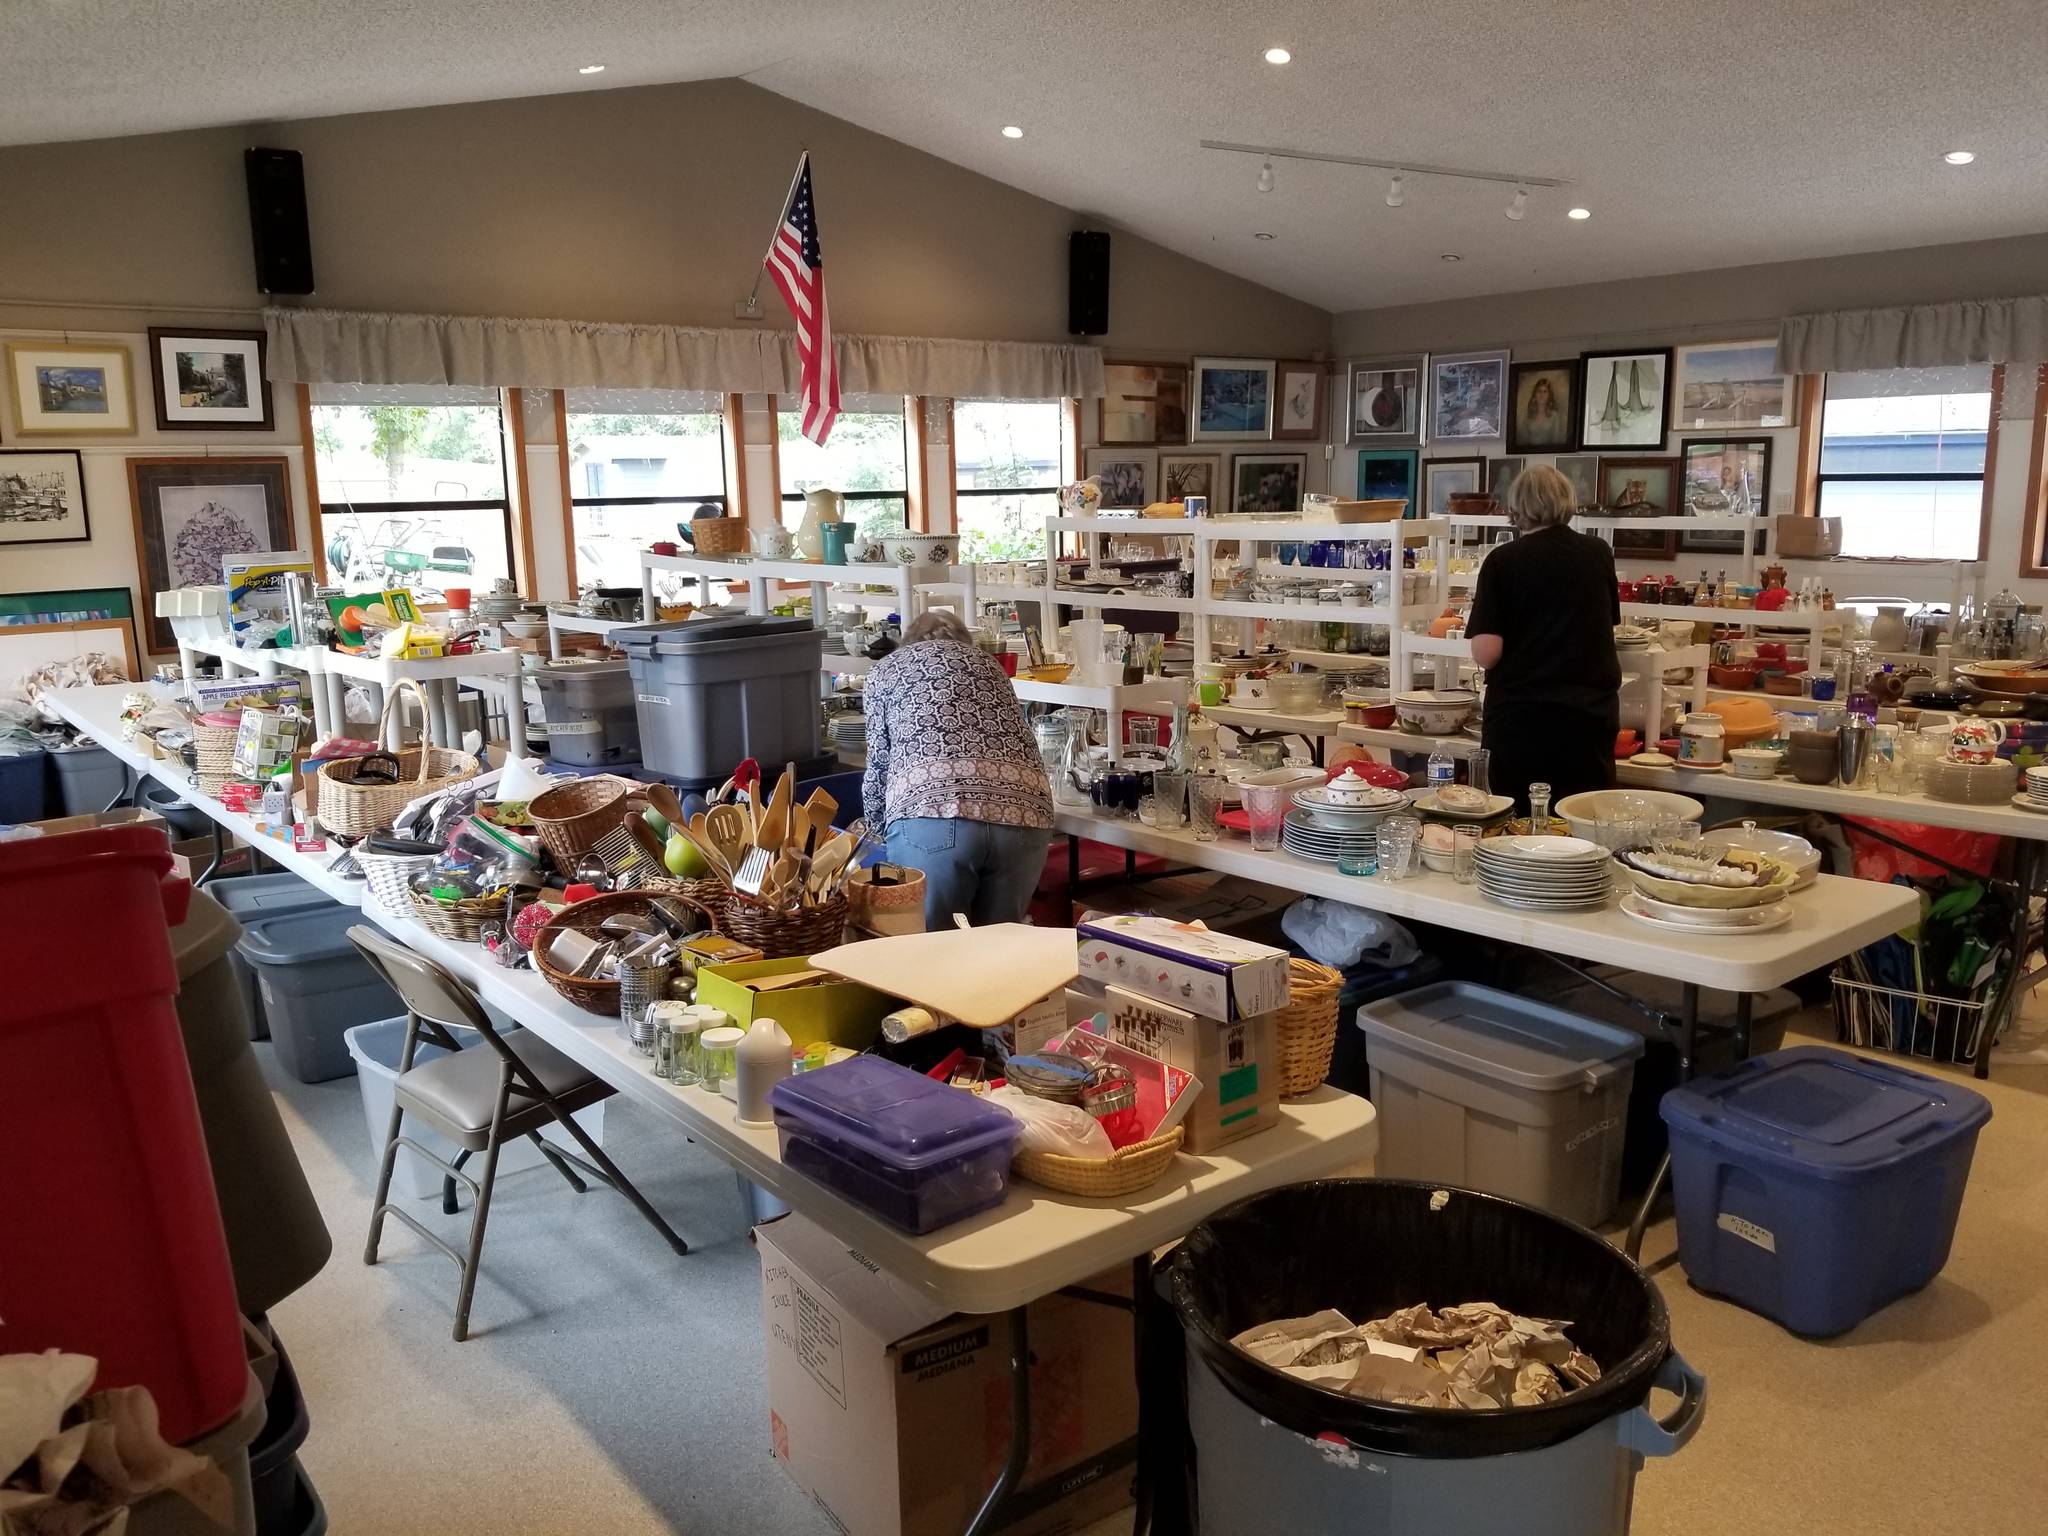 <em>The Greater Hansville Community Center’s 50th Annual Rummage Sale will be held on Aug. 10 through Aug. 11. </em> Nick Twietmeyer / Kitsap News Group